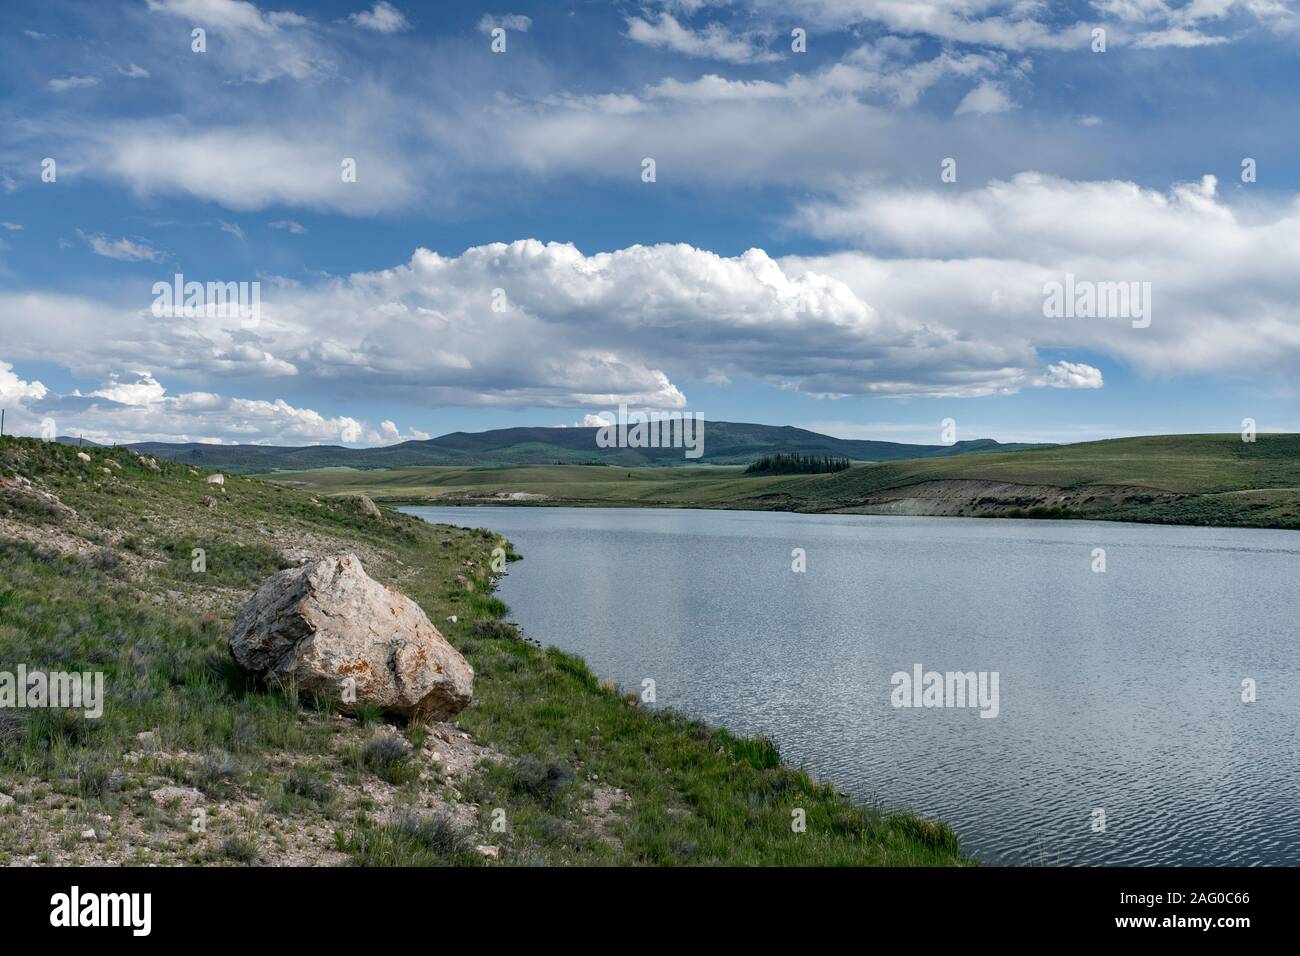 CO 00110-00... COLORADO - Obere Kuppel Resevoir, Dome Lakes State Wildlife, Saguache County entlang der Great Divide Mountain Bike Route. Stockfoto